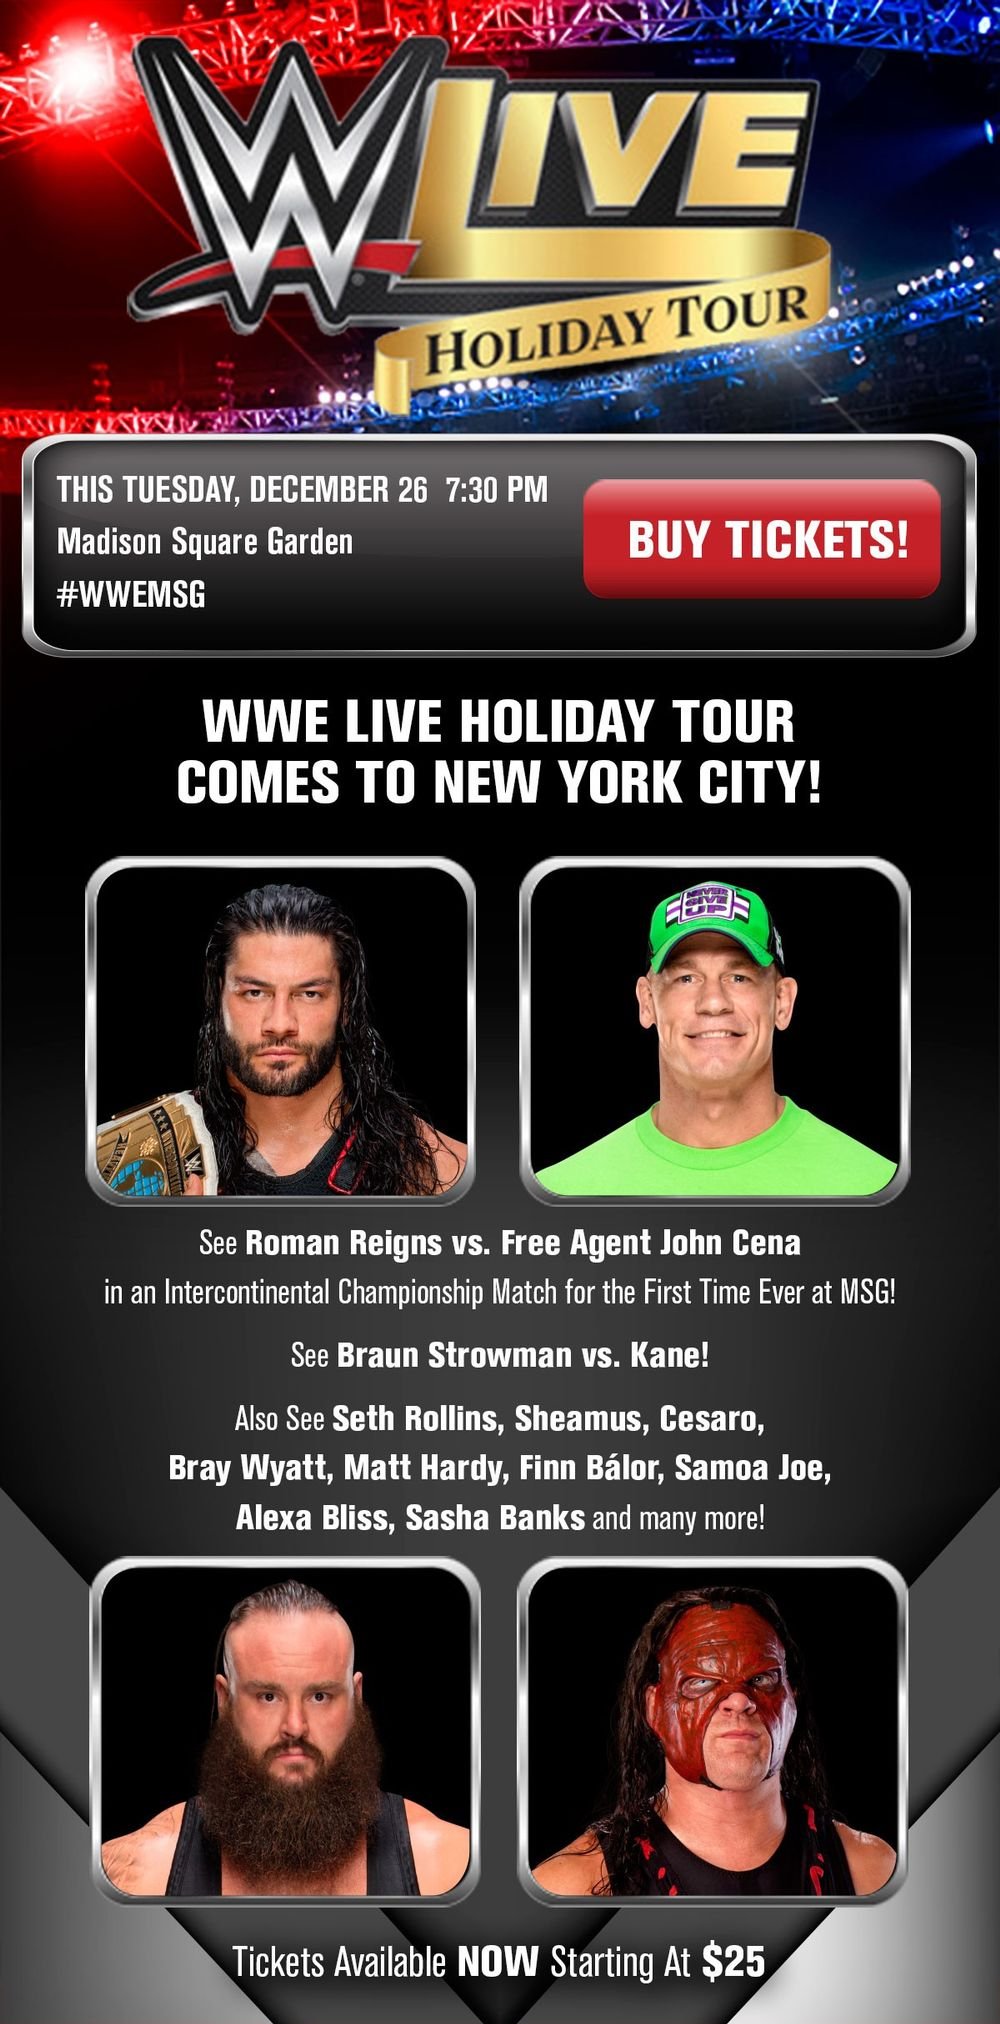 WWE Shop NEW YORK CITY! This Tuesday, WWE Live Holiday Tour comes to